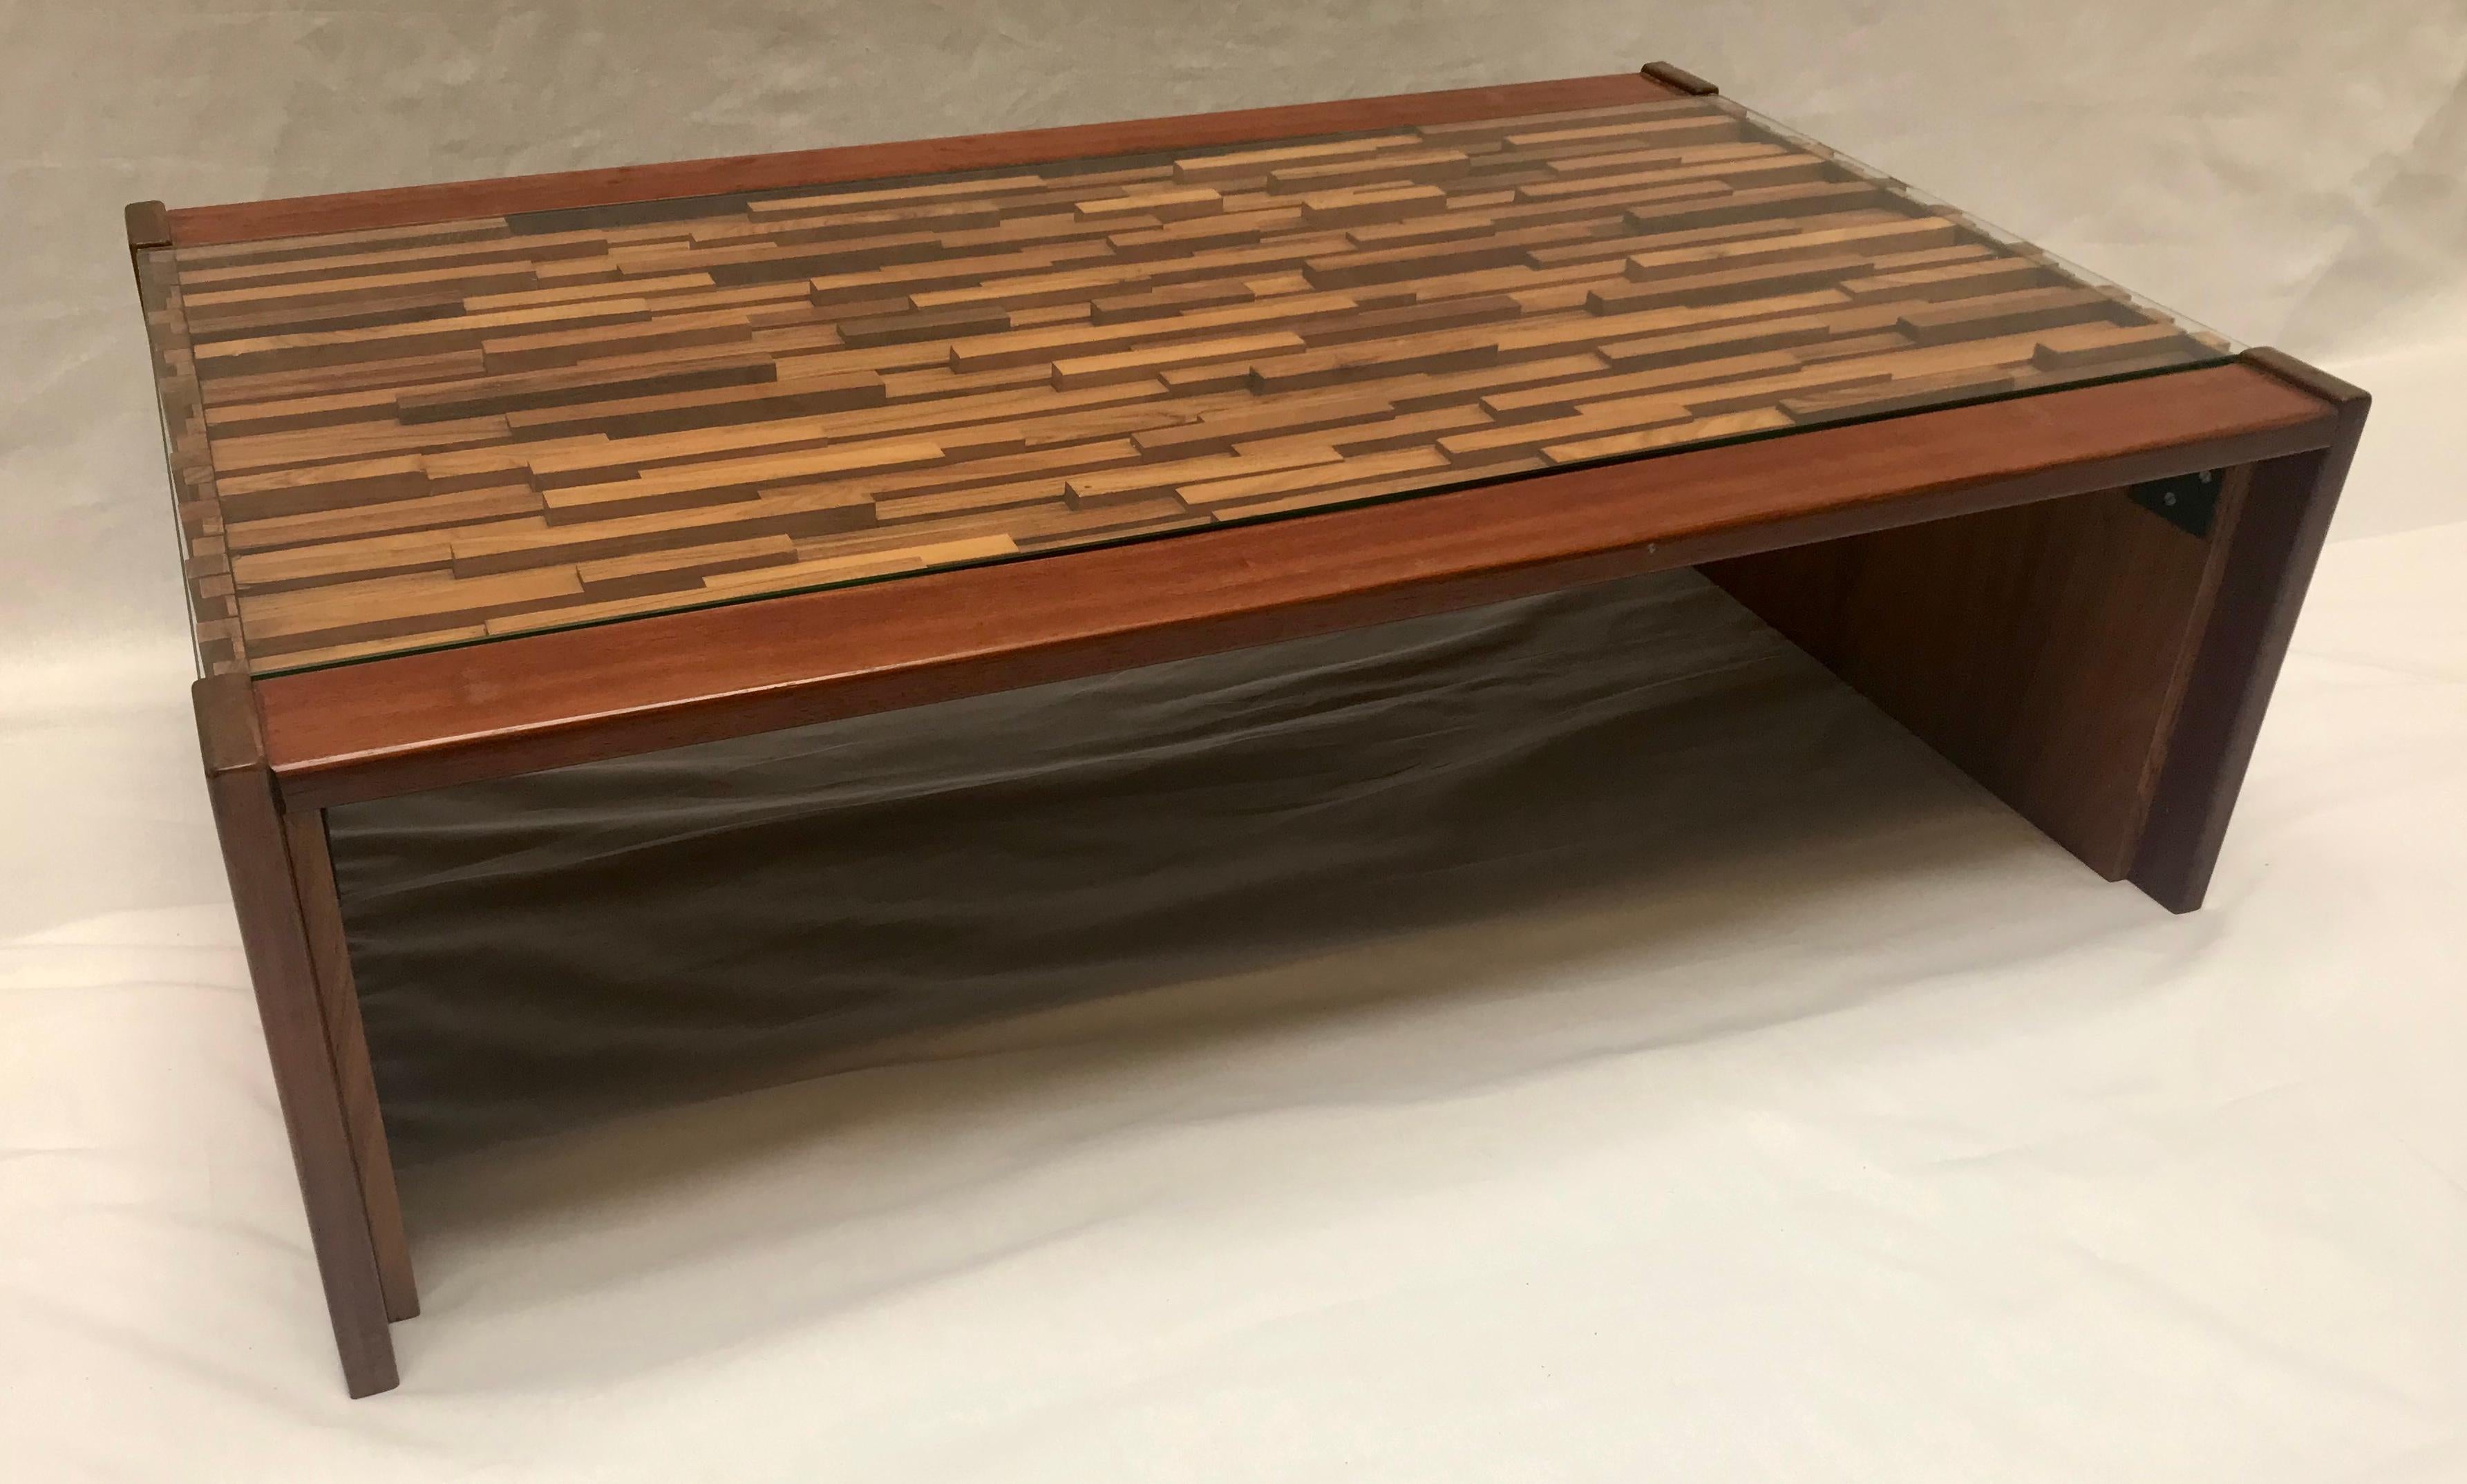 Percival Lafer, coffee table with glass top, Brazilian hardwood and mahogany,

circa 1970.